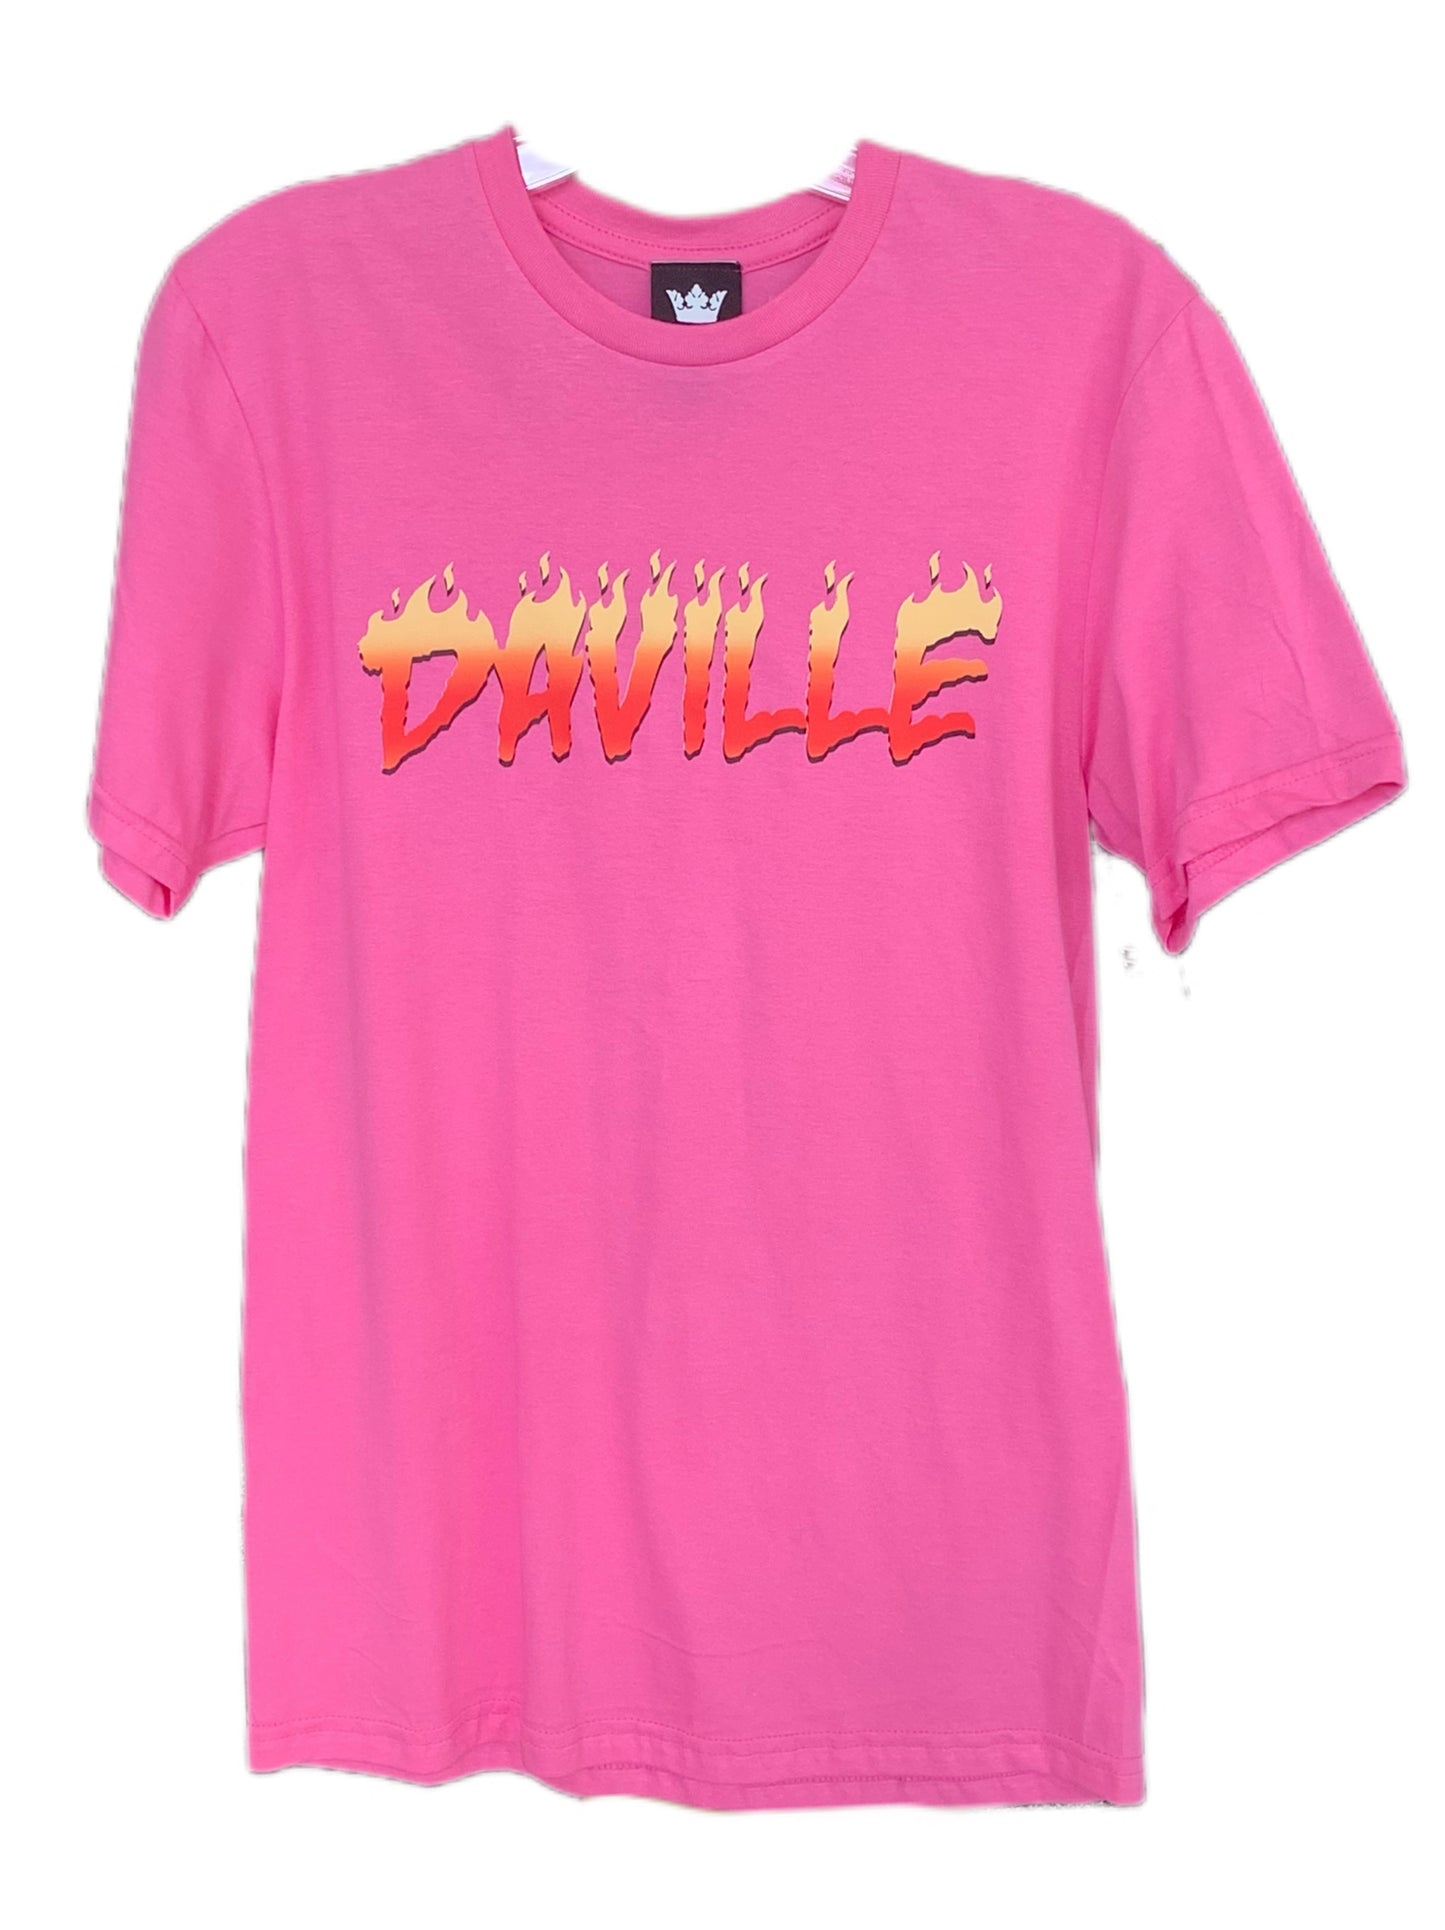 Daville Flame T Shirt Pink size Small